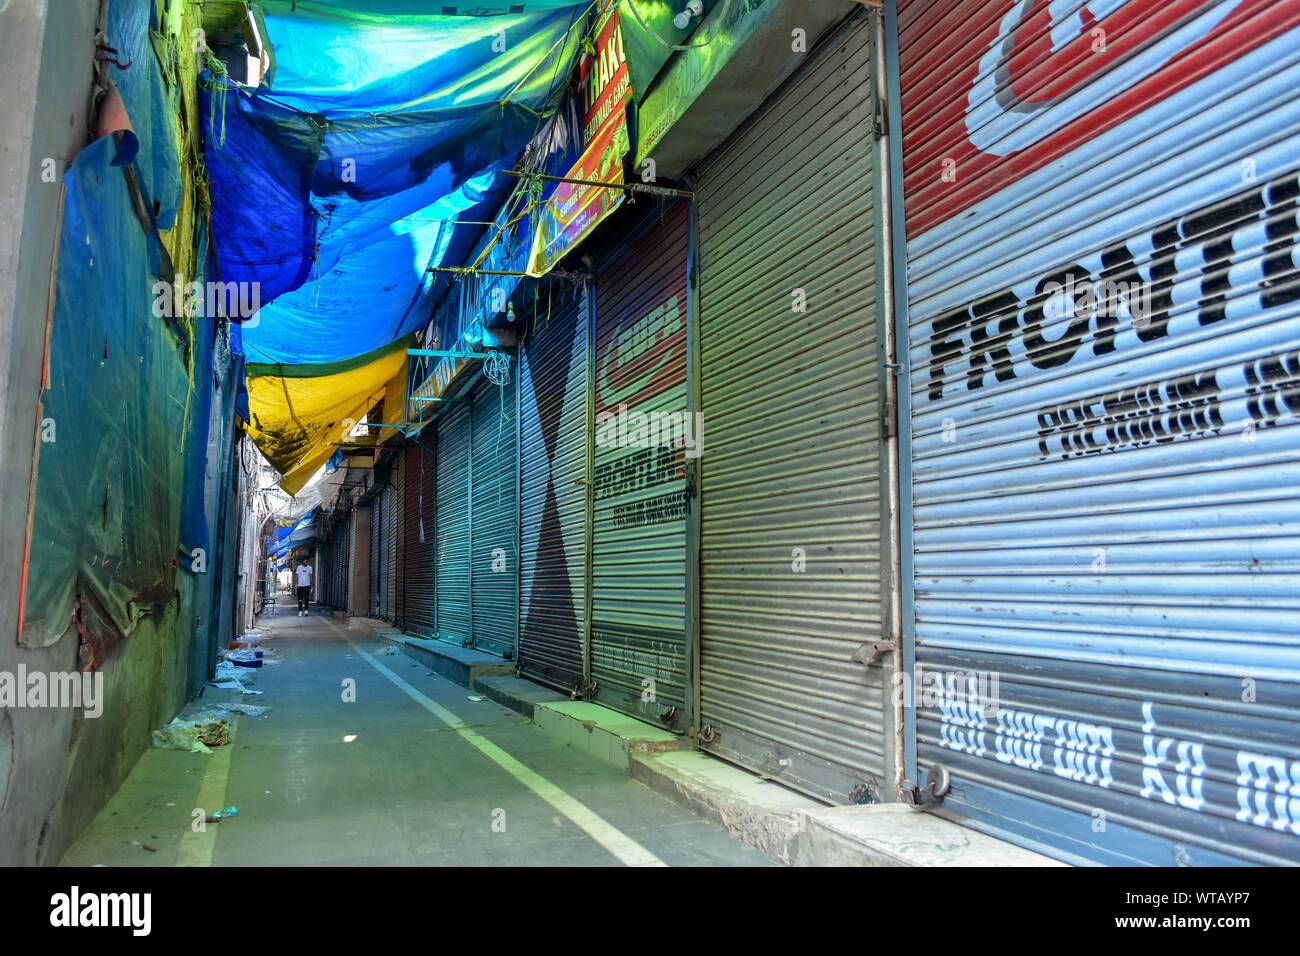 A man walks past closed shops during a shutdown in Srinagar, Kashmir.Kashmir valley remained shut for the 38th consecutive day following the scrapping of Article 370 by the central government which grants special status to Jammu & Kashmir. Stock Photo